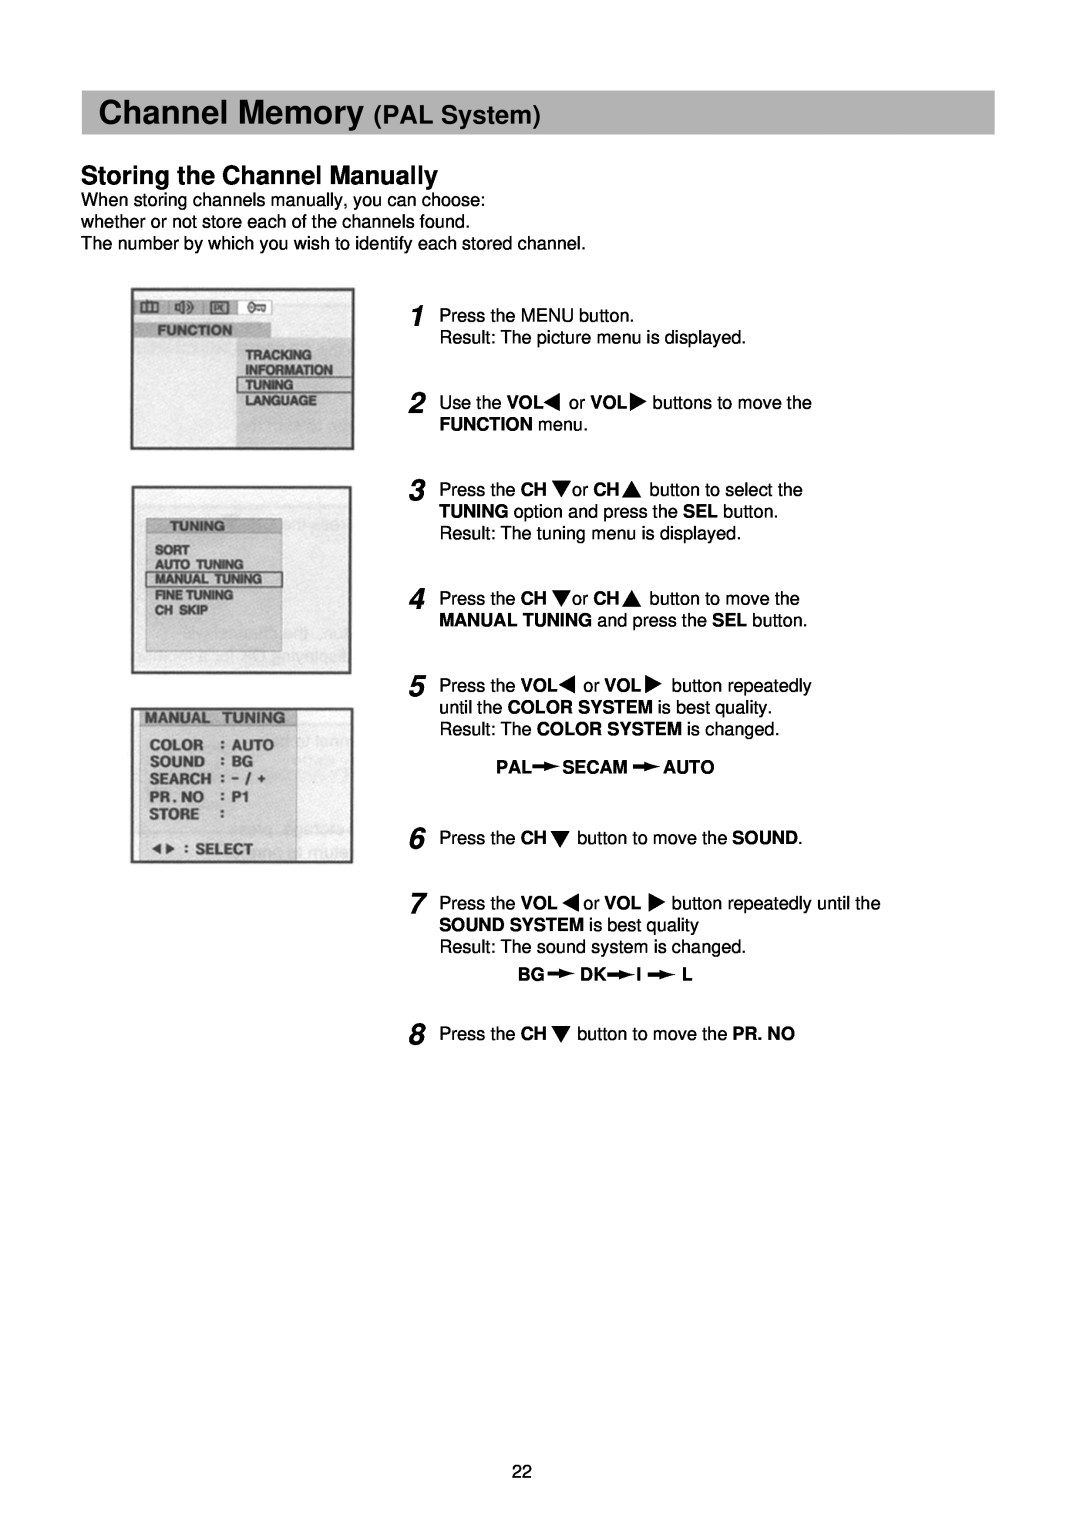 Palsonic TFTV-201 owner manual Storing the Channel Manually, Channel Memory PAL System 